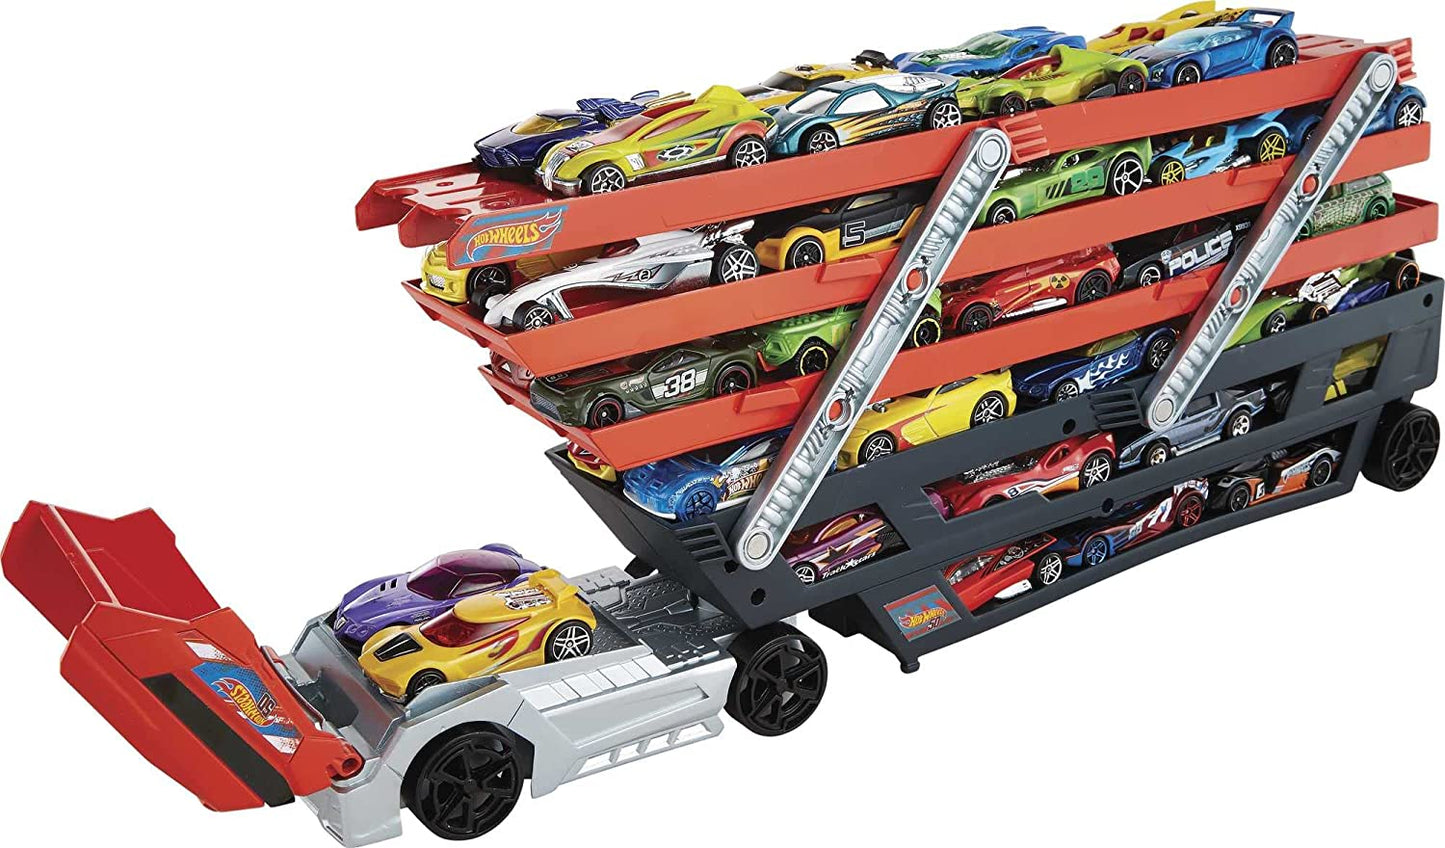 Hot Wheels HW Mega Hauler Truck, Semi Holds More than 50 Toy Cars & Expands to 6 Levels, Connects to Hot Wheels Track, Toy for Kids 3 Years & Older [Amazon Exclusive]